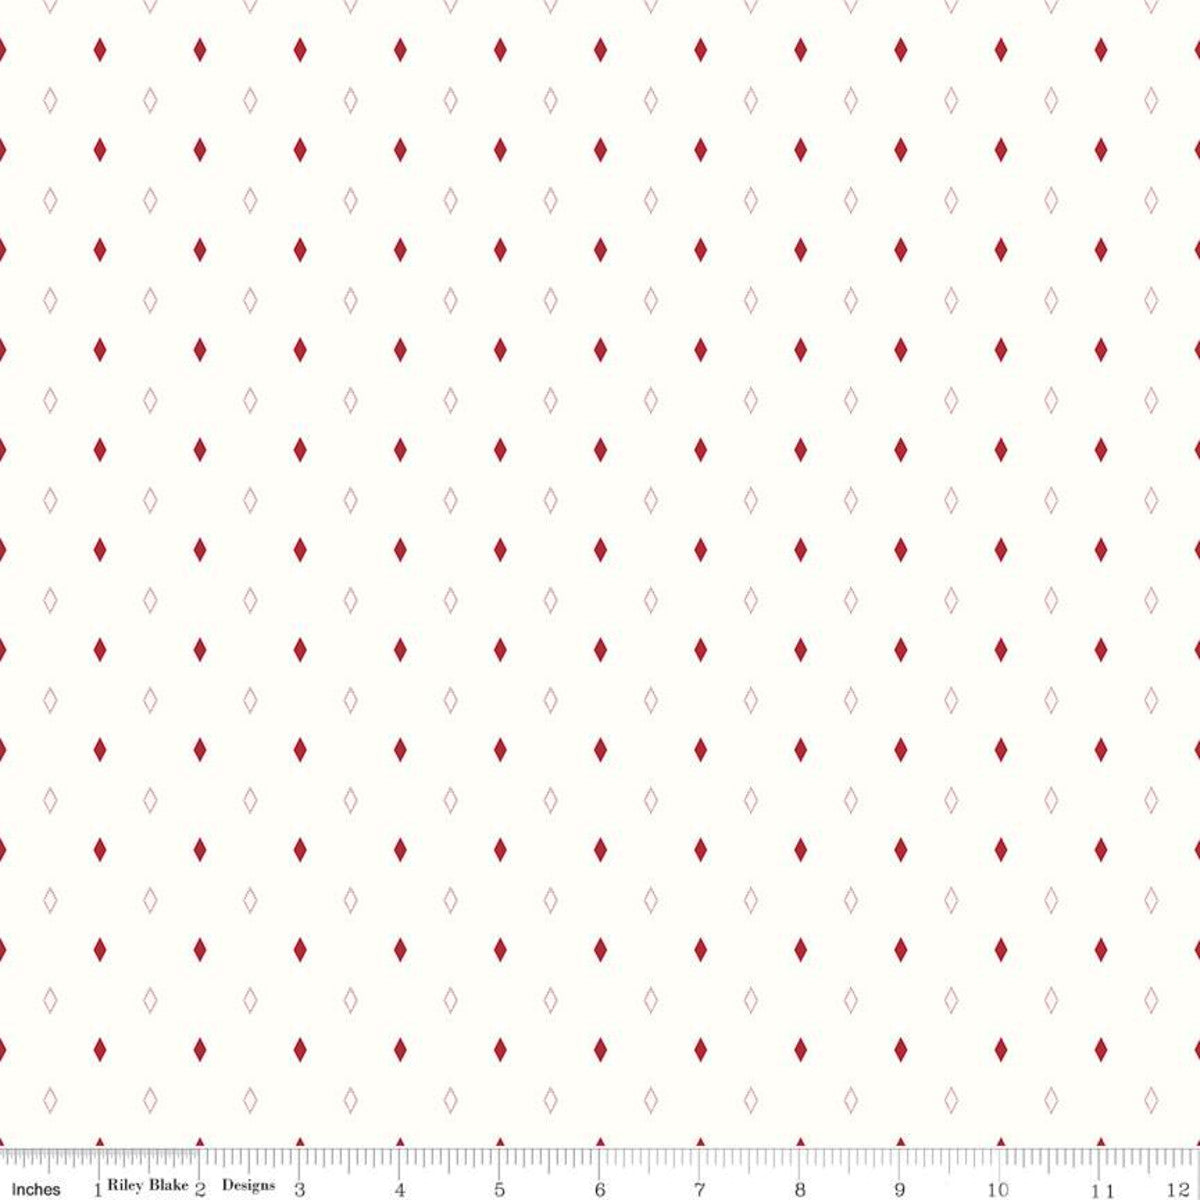 Red Hot collection red diamonds on off white backround designed by Amanda Castor for Riley Blake Designs cotton quilt fabric material garments bags 